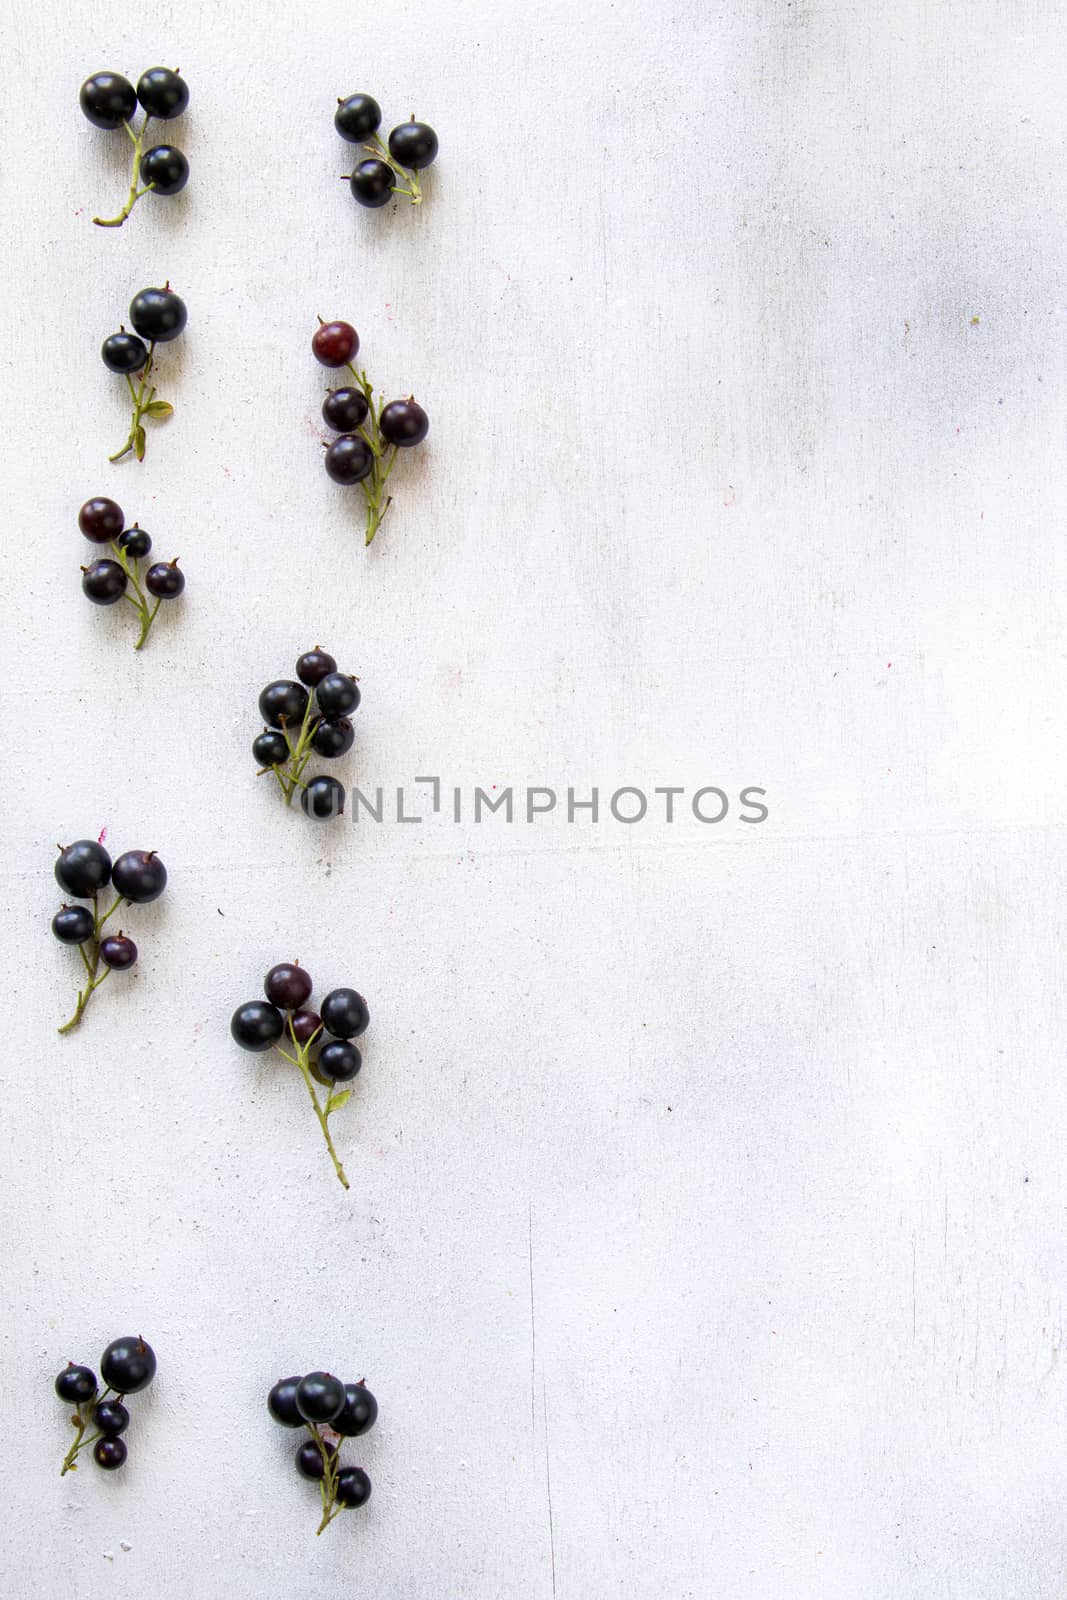 Currant on the white background, high angle view